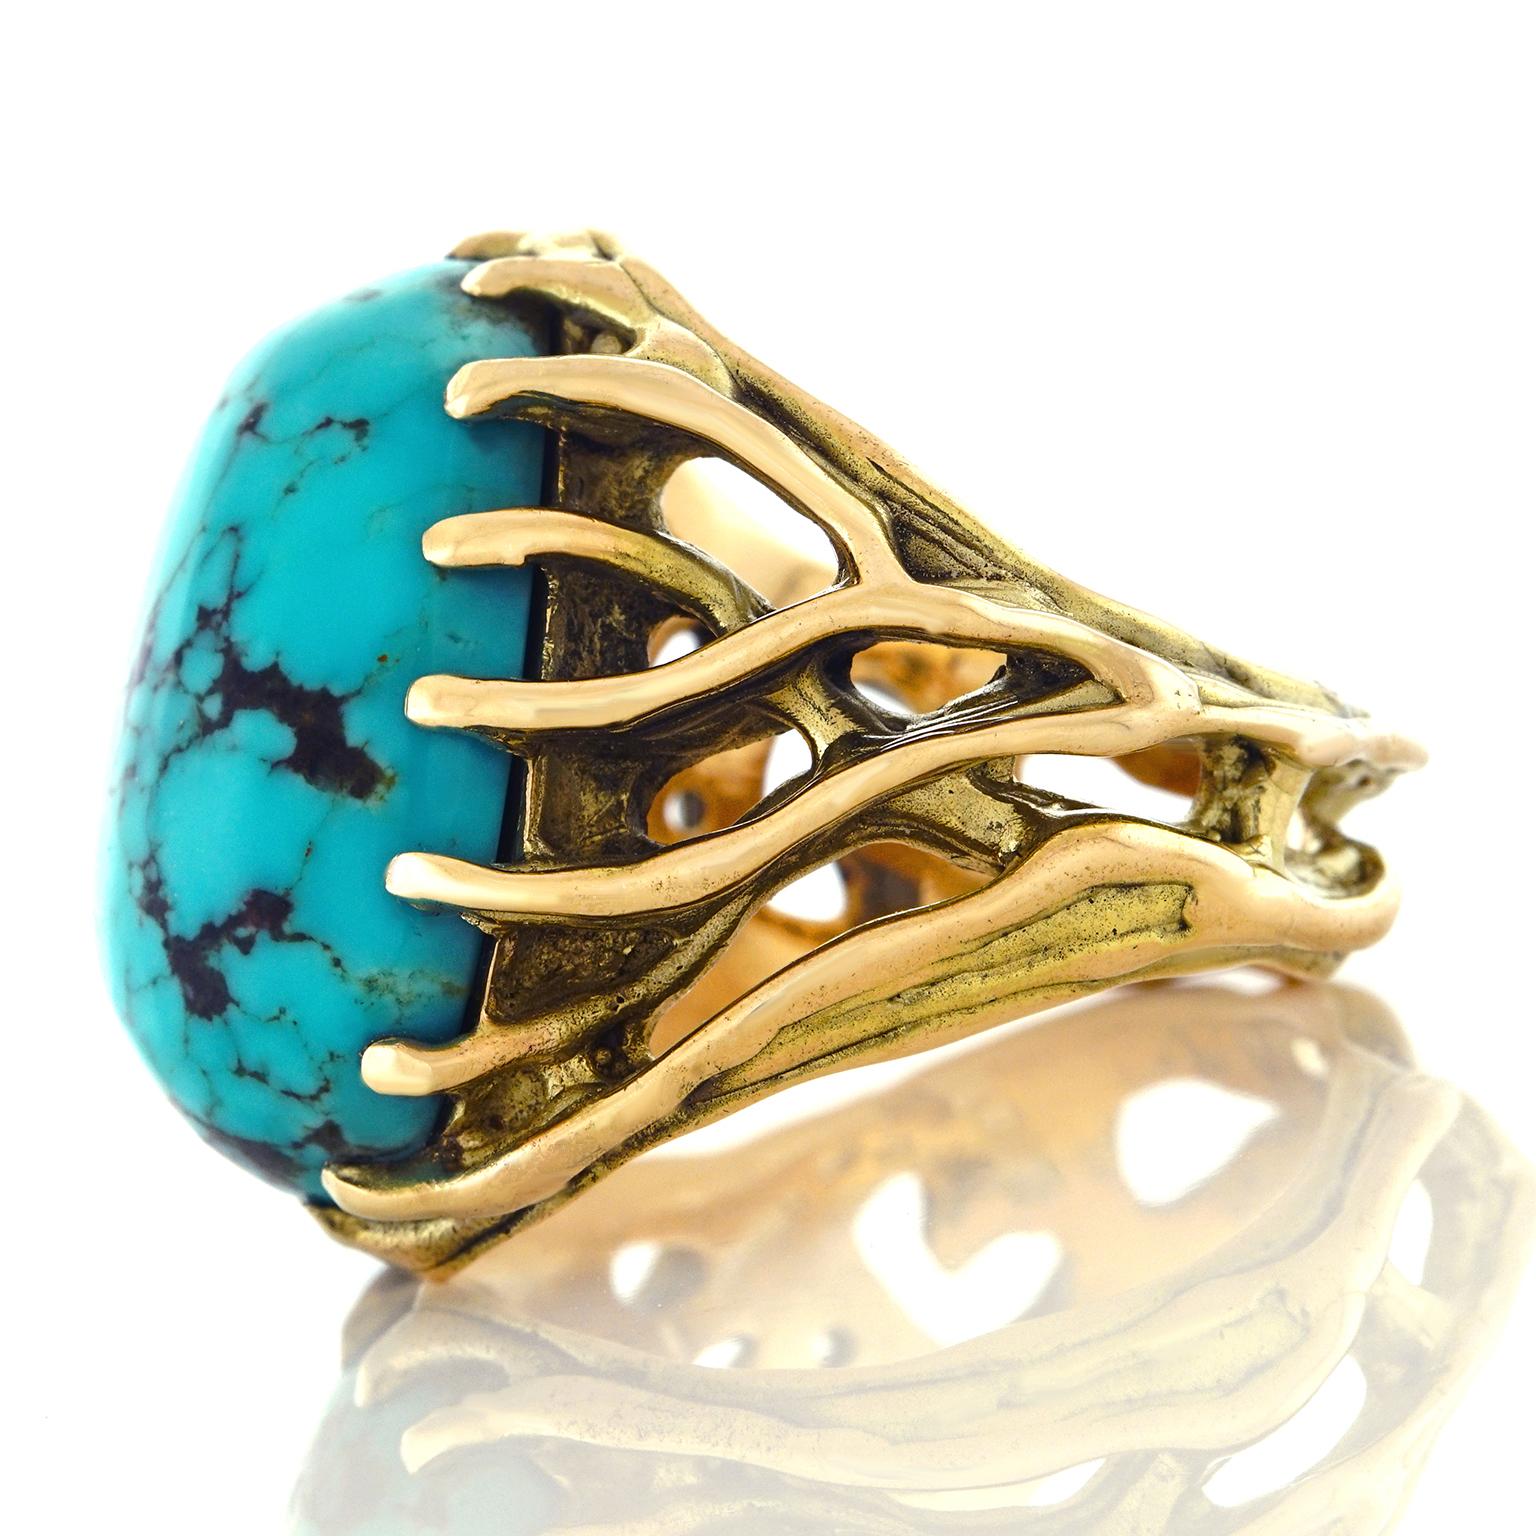 Women's or Men's 1960s Hippie Jewelry Turquoise Set Gold Ring